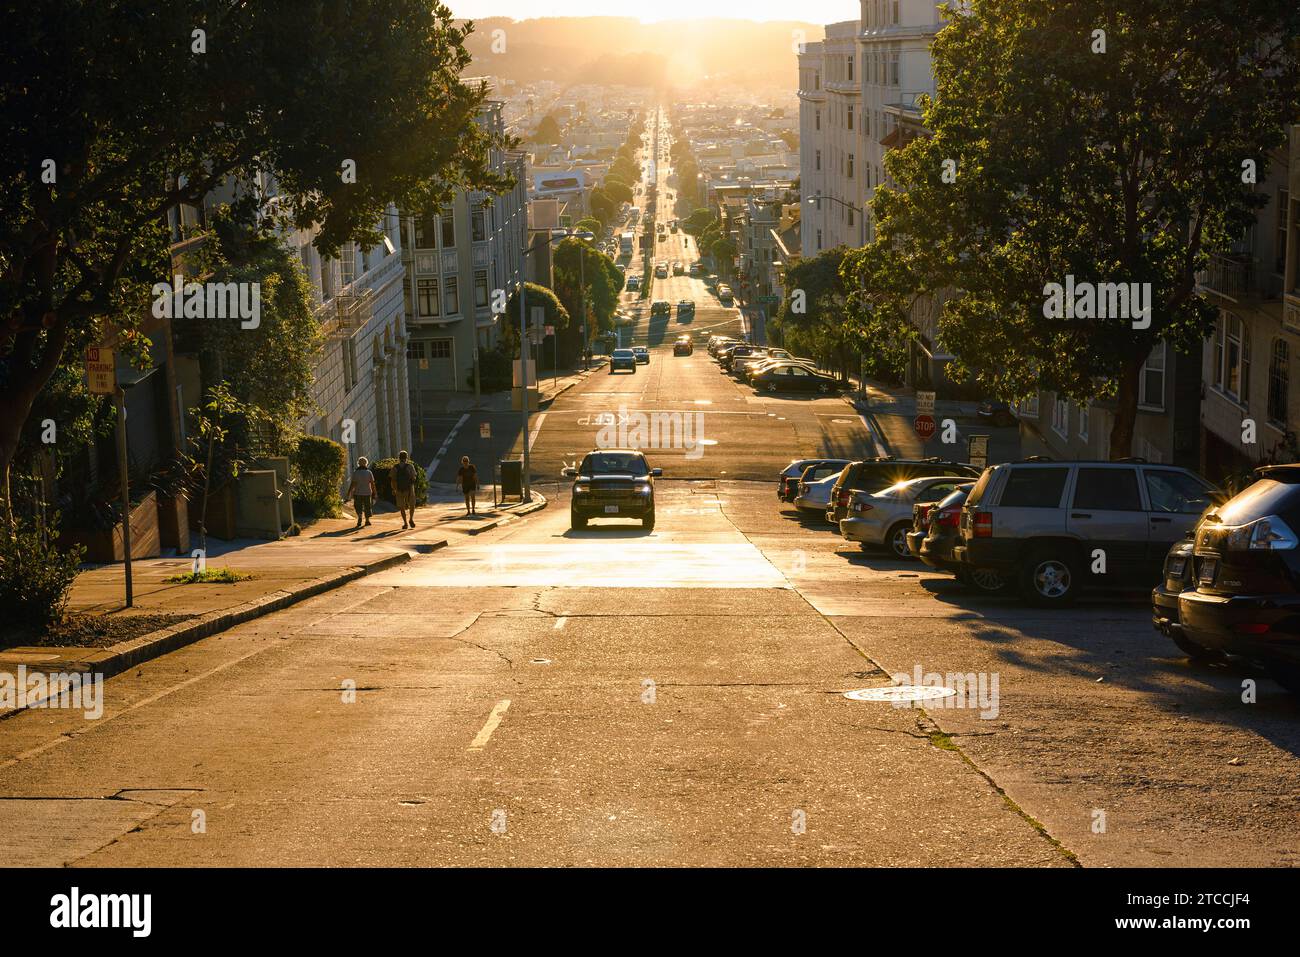 A car climbs one of the steep hills in San Francisco as the sun sets over the city in the background. Stock Photo